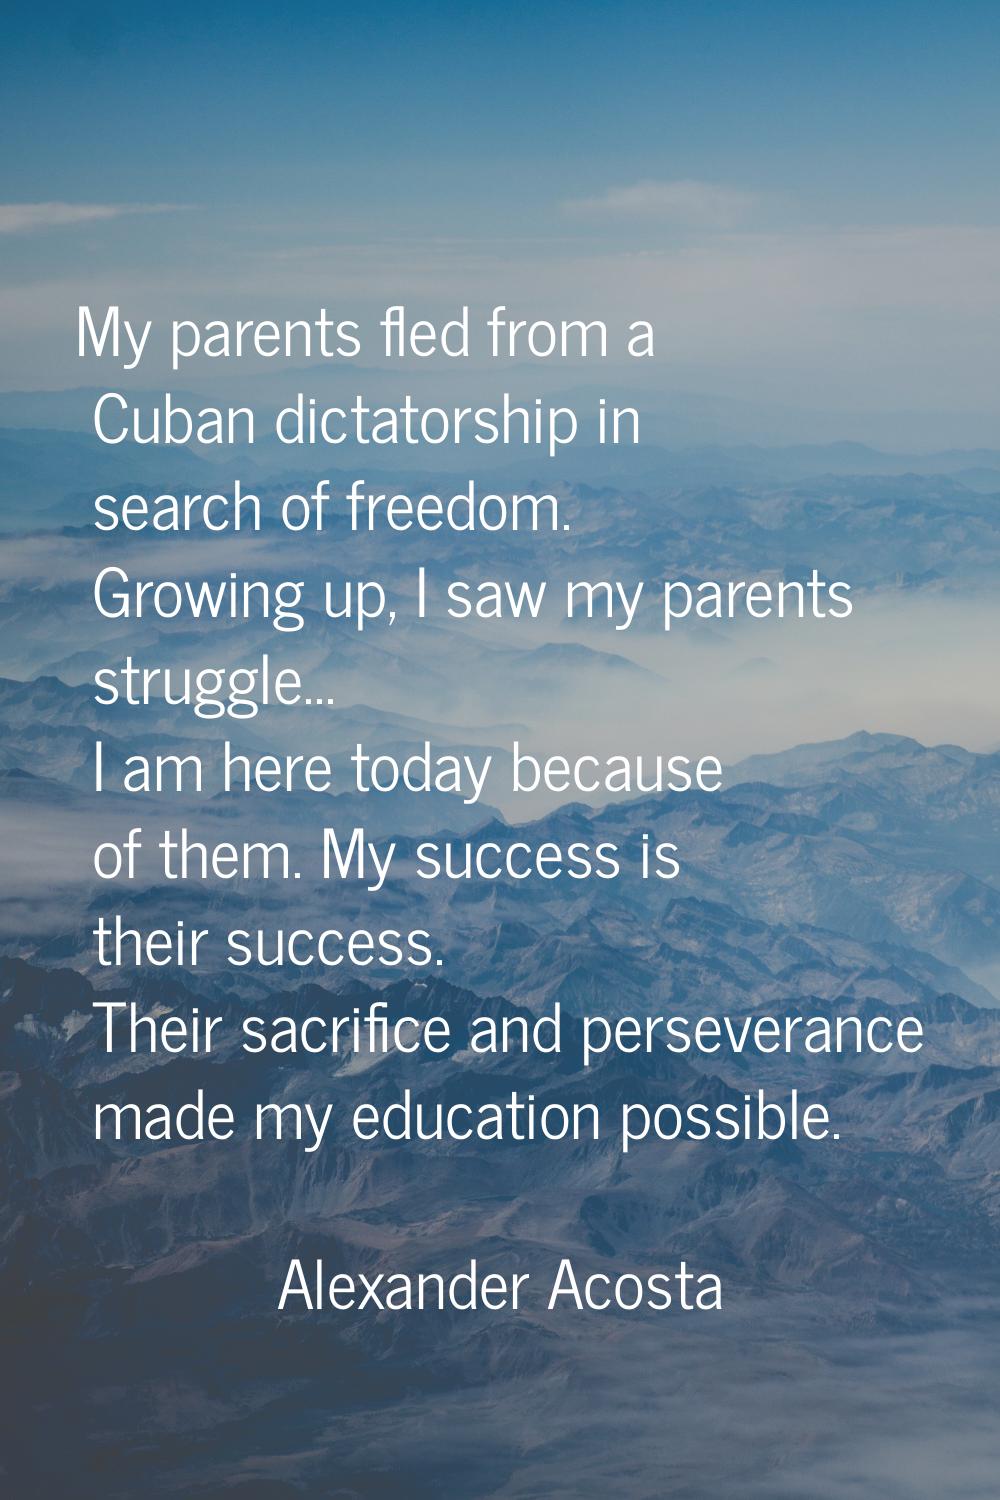 My parents fled from a Cuban dictatorship in search of freedom. Growing up, I saw my parents strugg